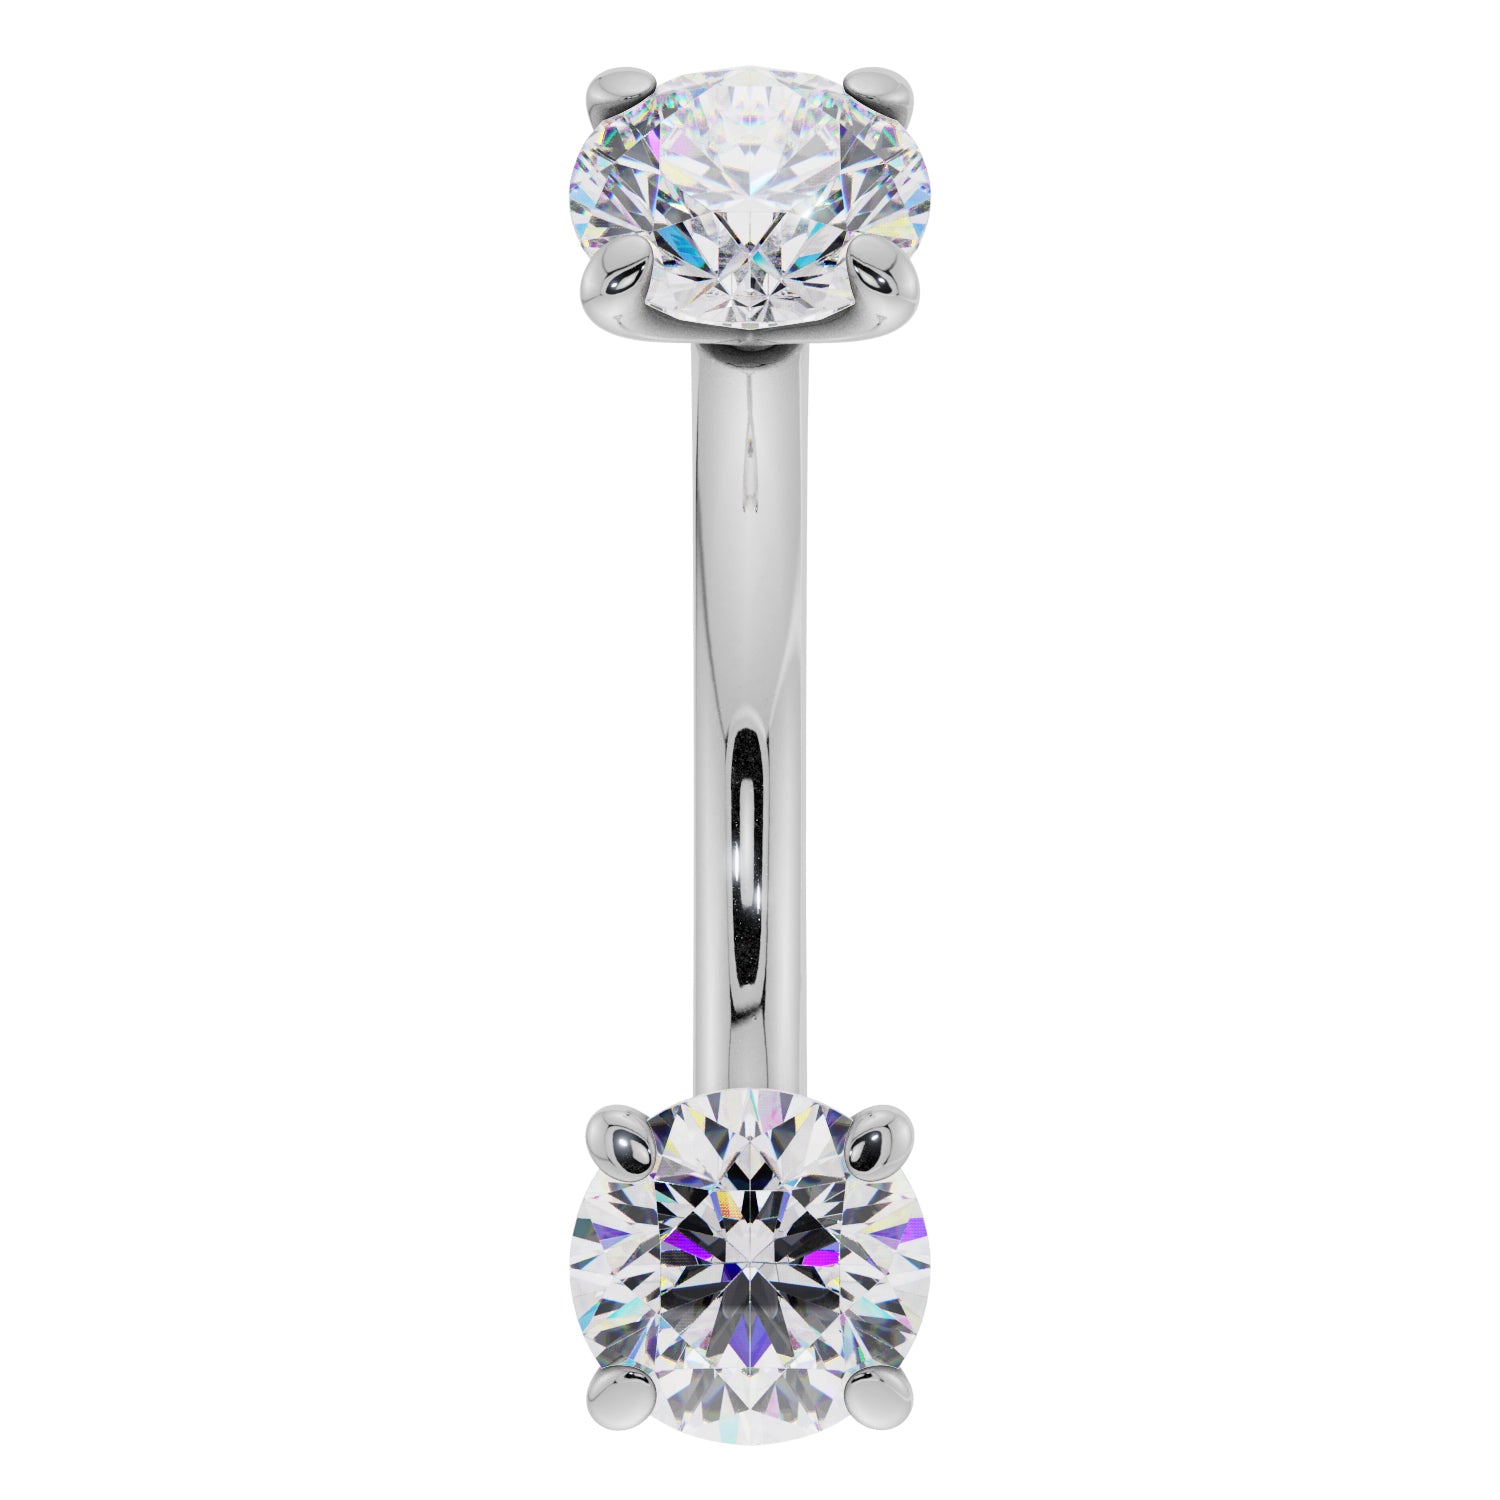 Dainty Diamond Prong-Set Curved Barbell for Eyebrow Rook Belly-14K White Gold   14G (1.6mm)   7 16